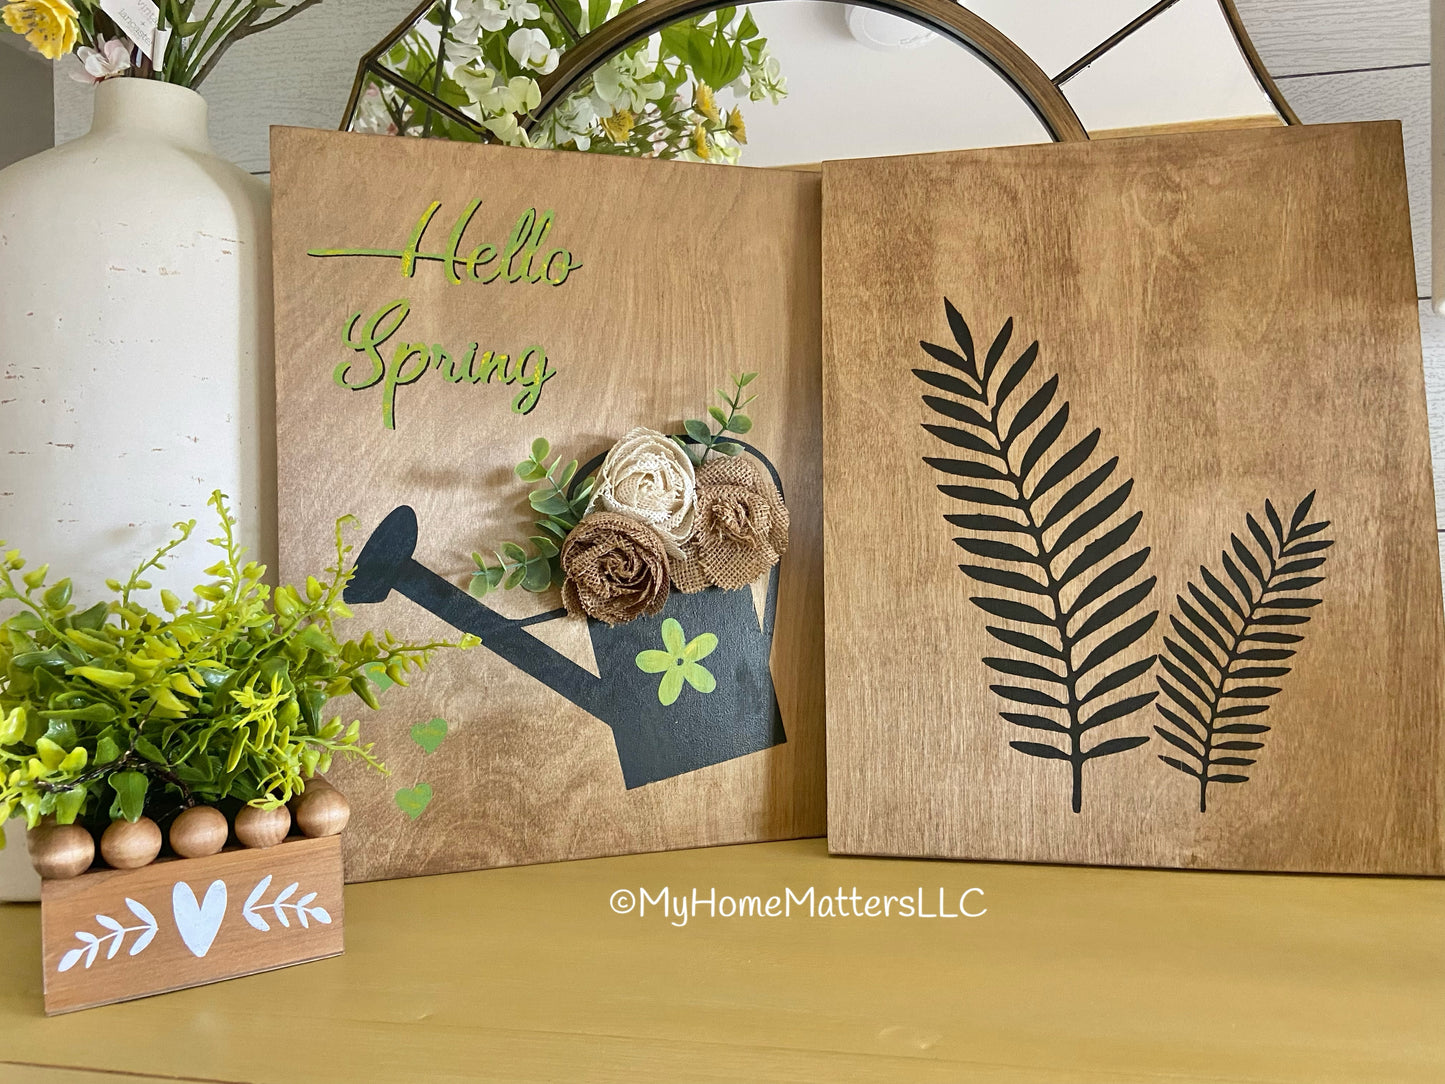 Boxed Up May 2022 - Reversible Spring Sign